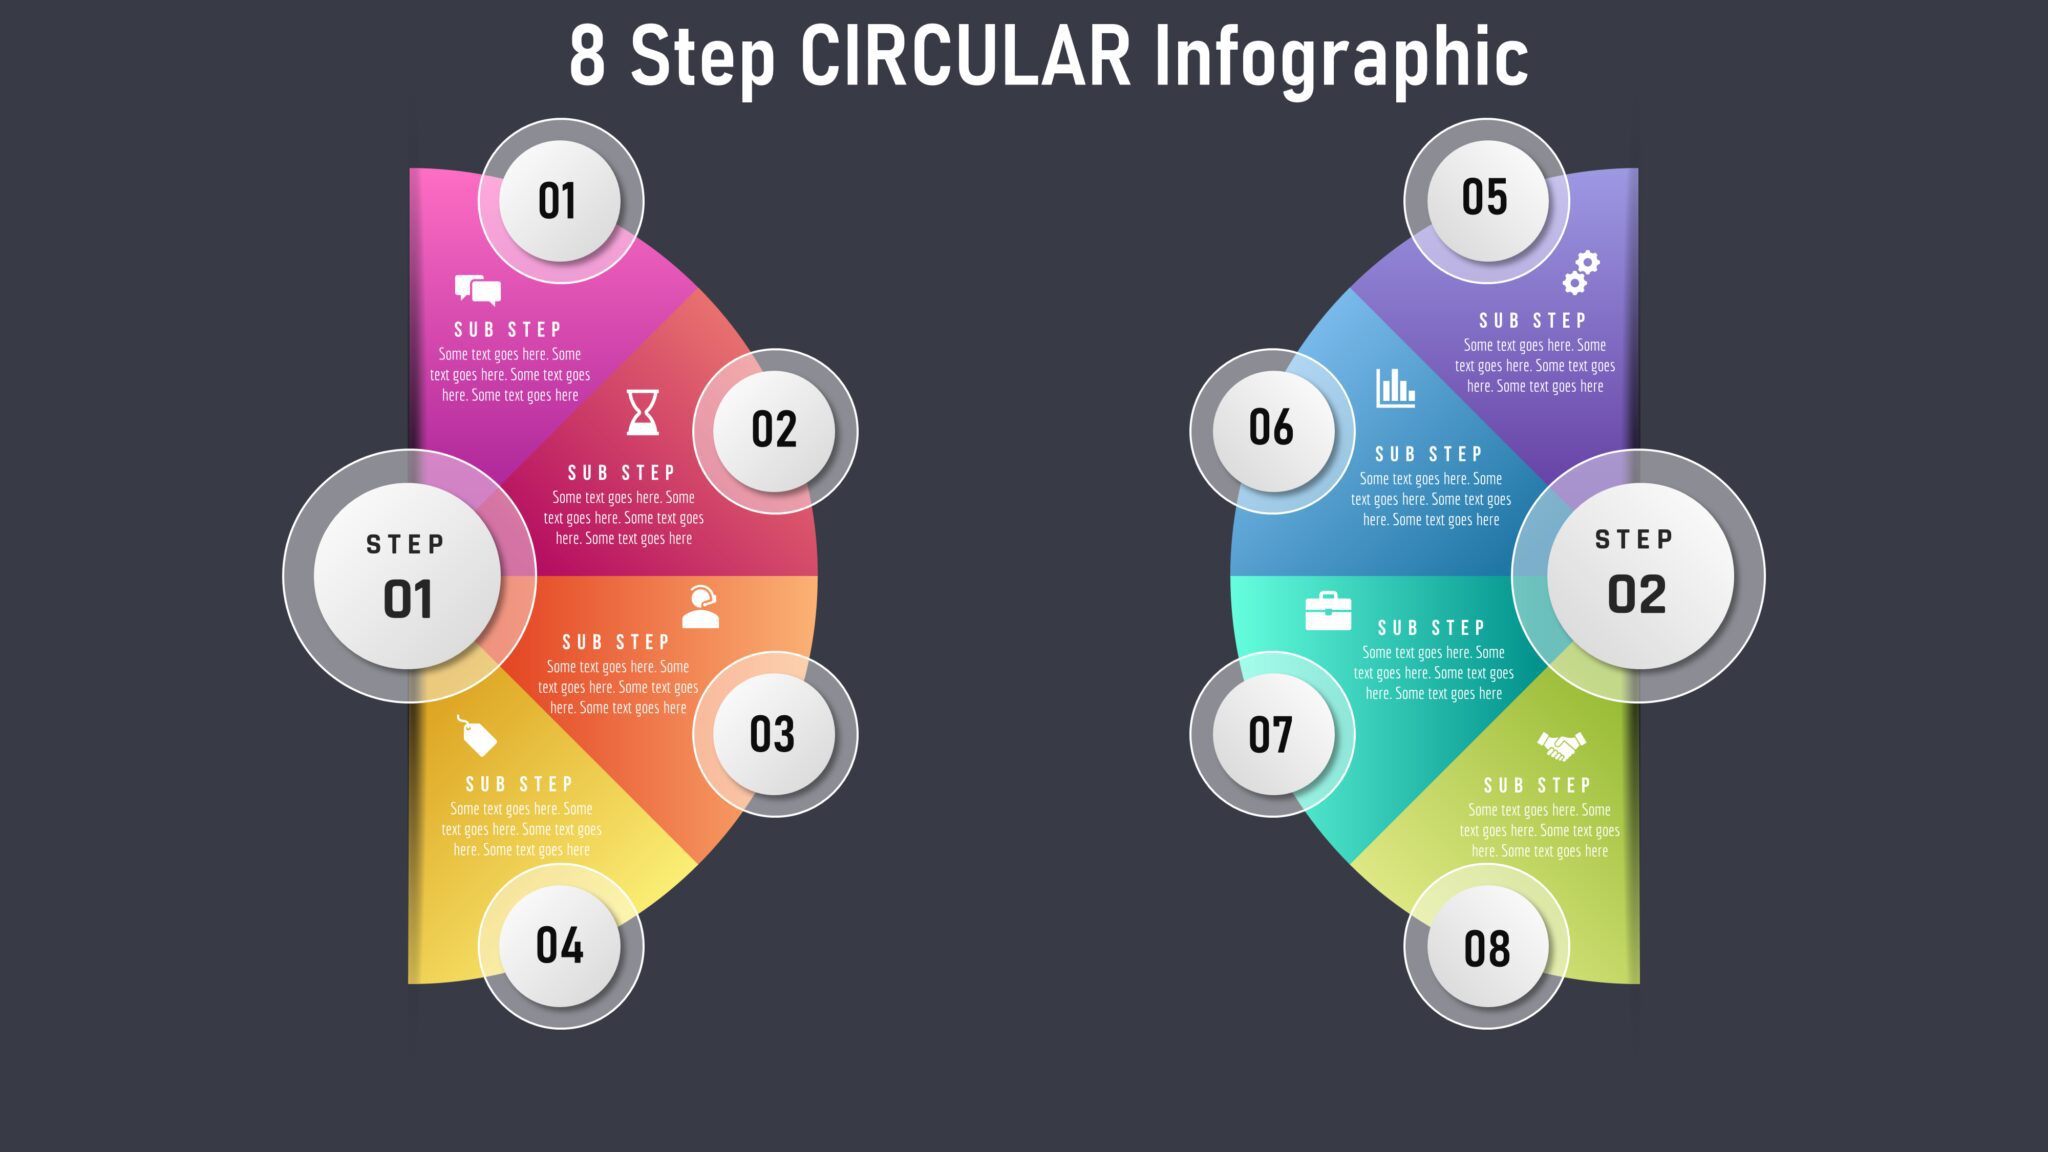 33powerpoint 8 Step Circular Infographic Powerup With Powerpoint 6094